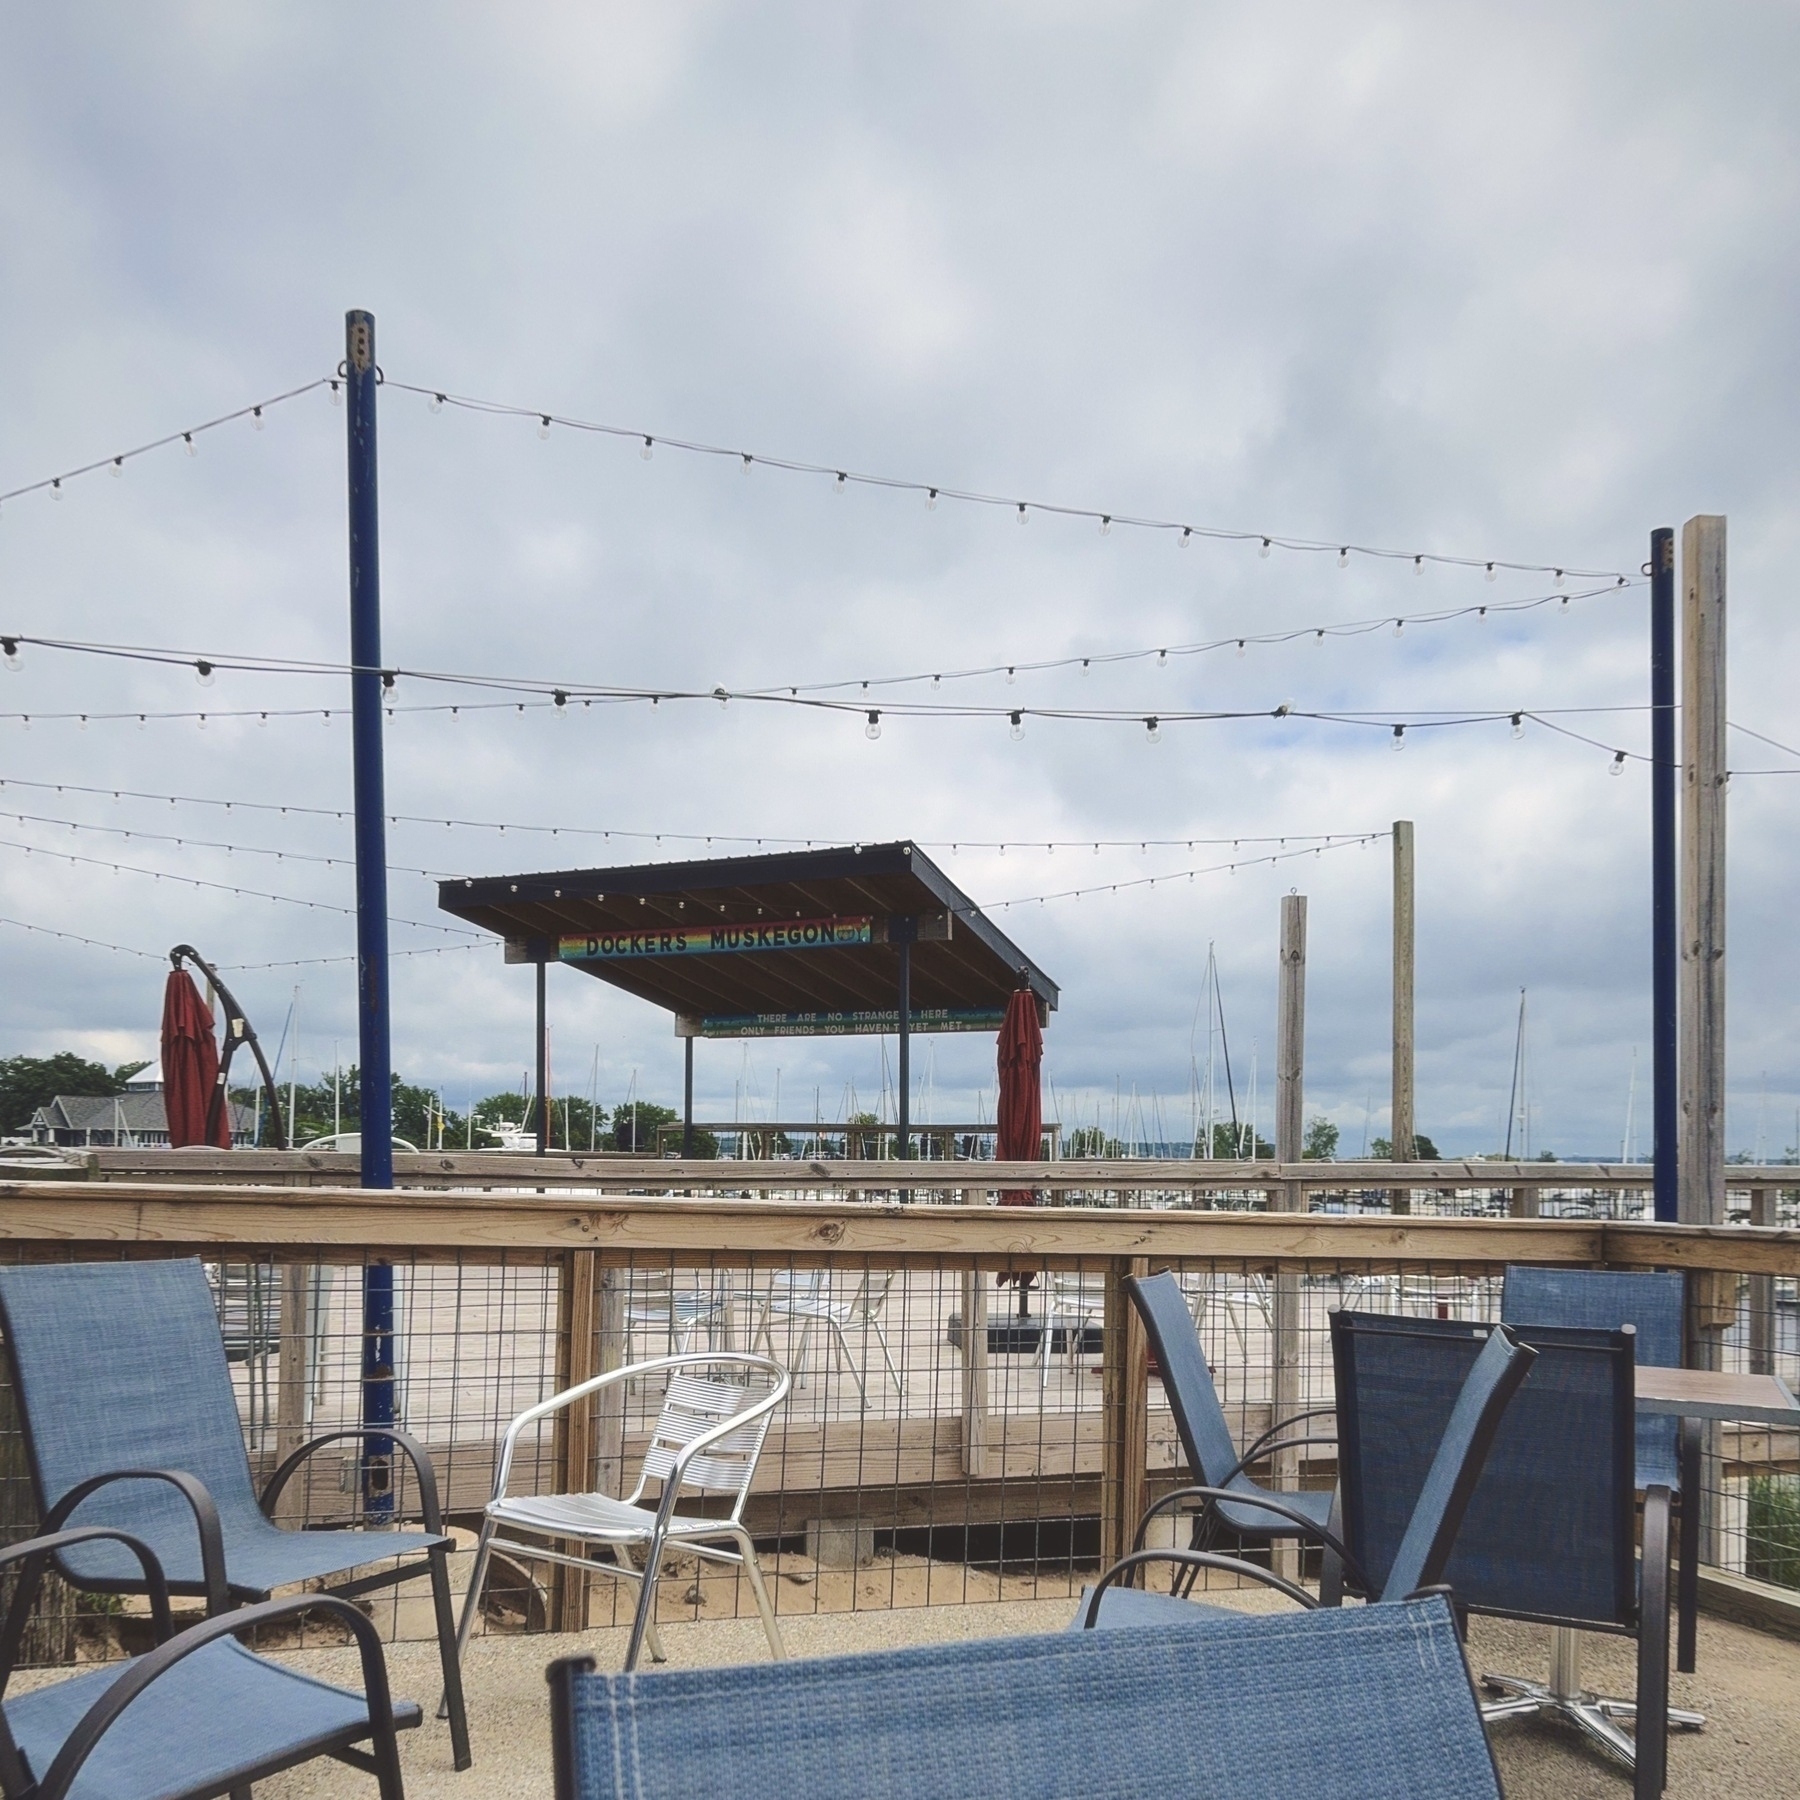 the patio with several chairs and a pergola with the restaurant name Dockers Muskegon in blue